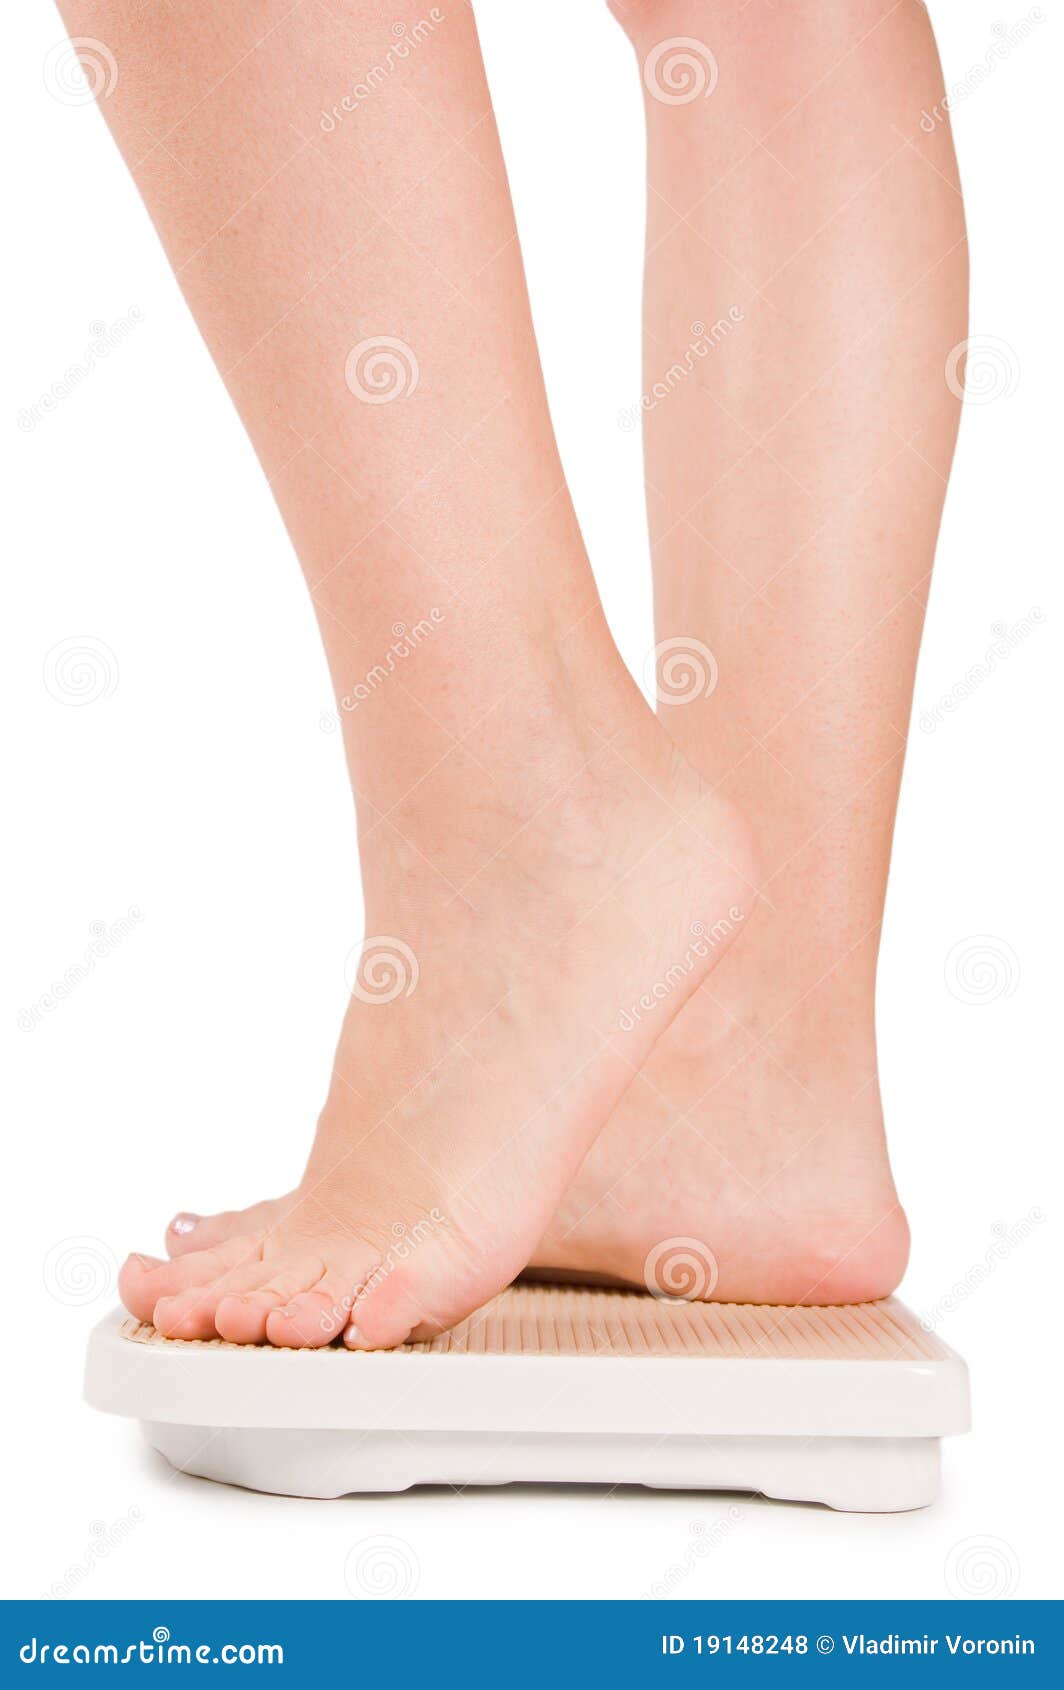 Female Feet On Scales Royalty Free Stock Photos Image